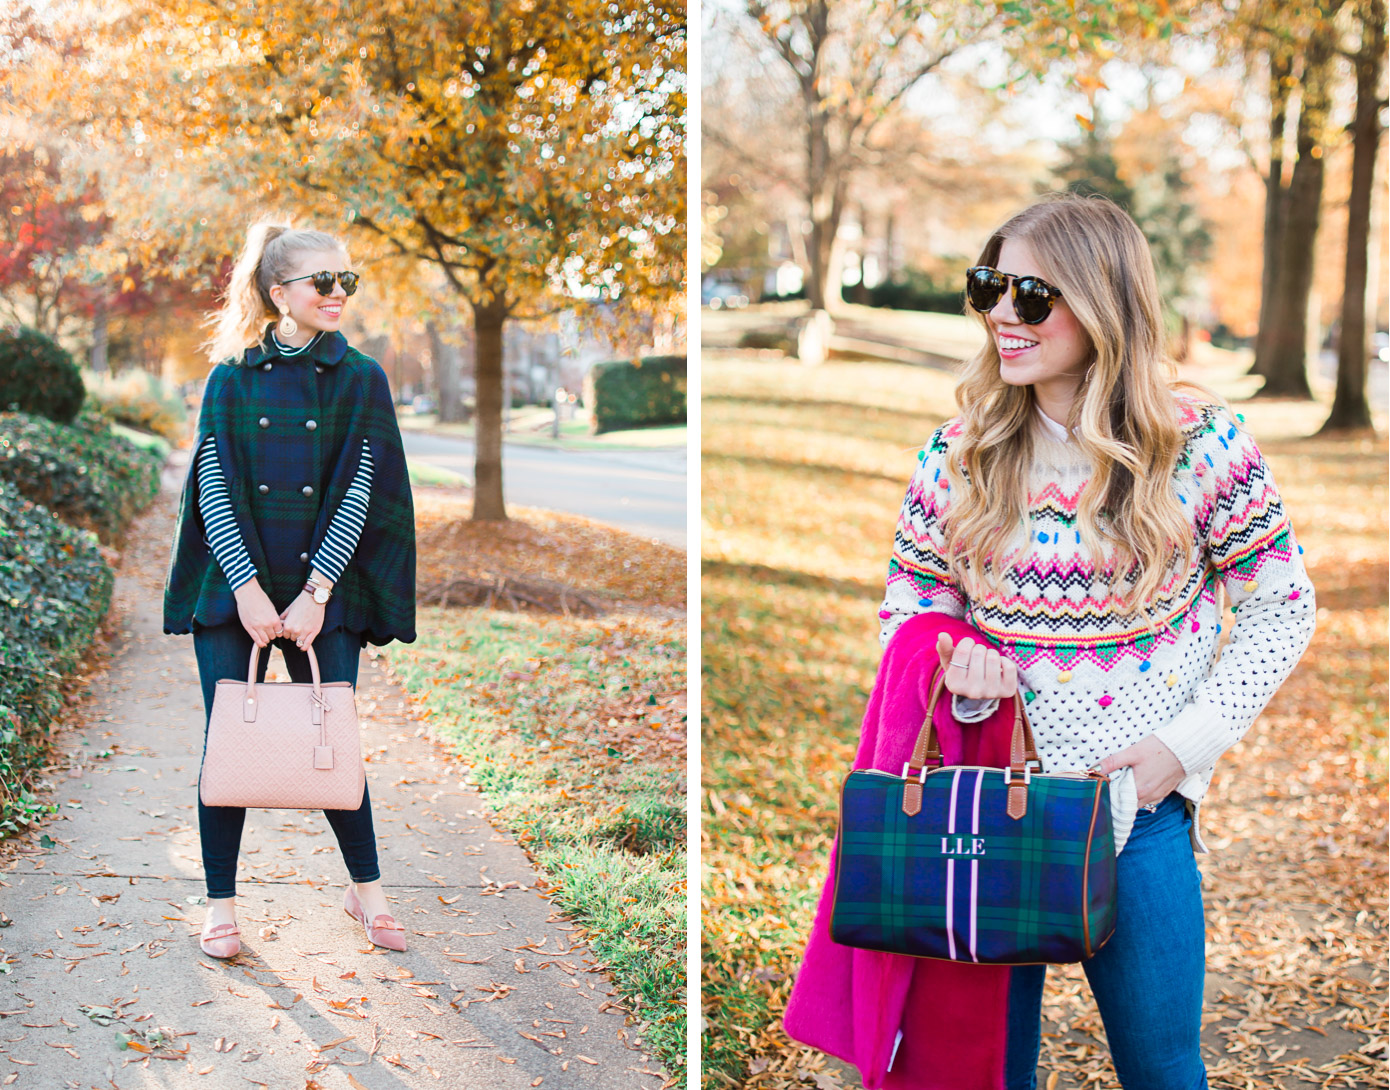 Winter Wardrobe Must Haves | Louella Reese Life & Style Blog